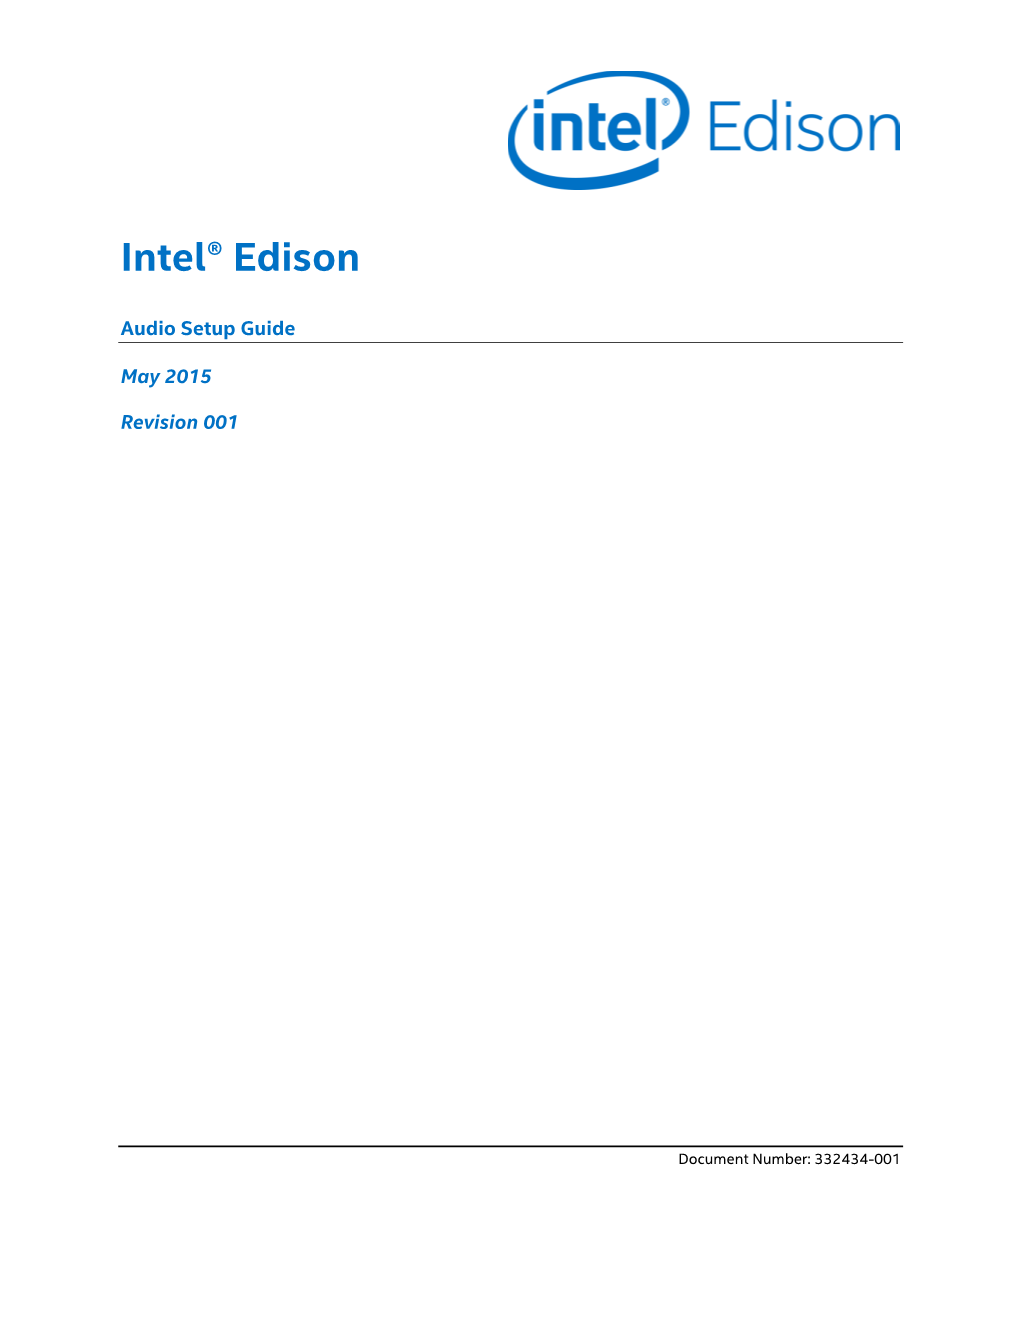 Intel® Edison Audio Setup Guide May 2015 2 Document Number: 332434-001